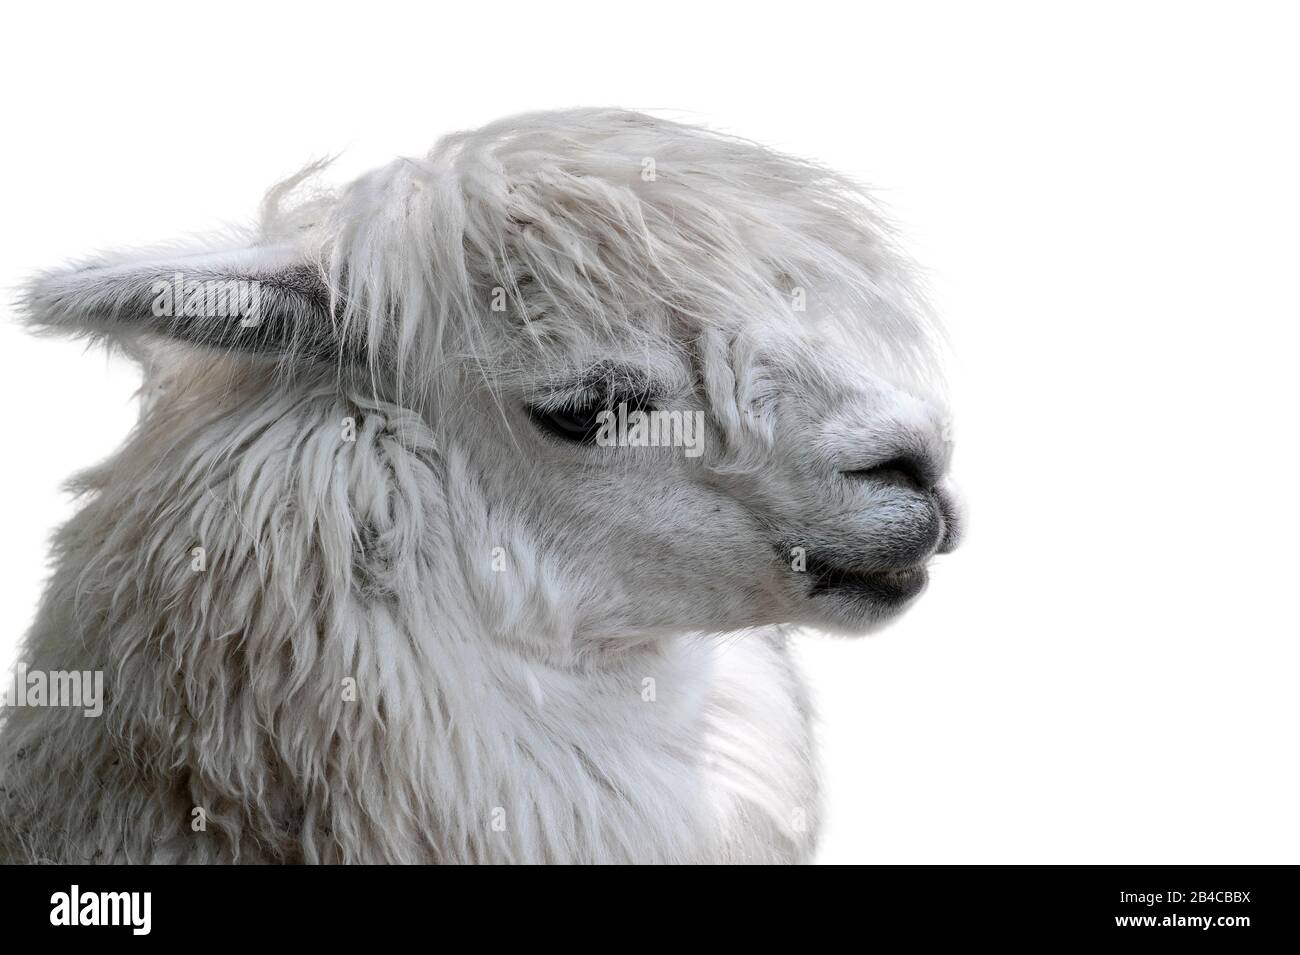 Alpaca (Vicugna pacos / Lama pacos) close up portrait, native to South America against white background Stock Photo